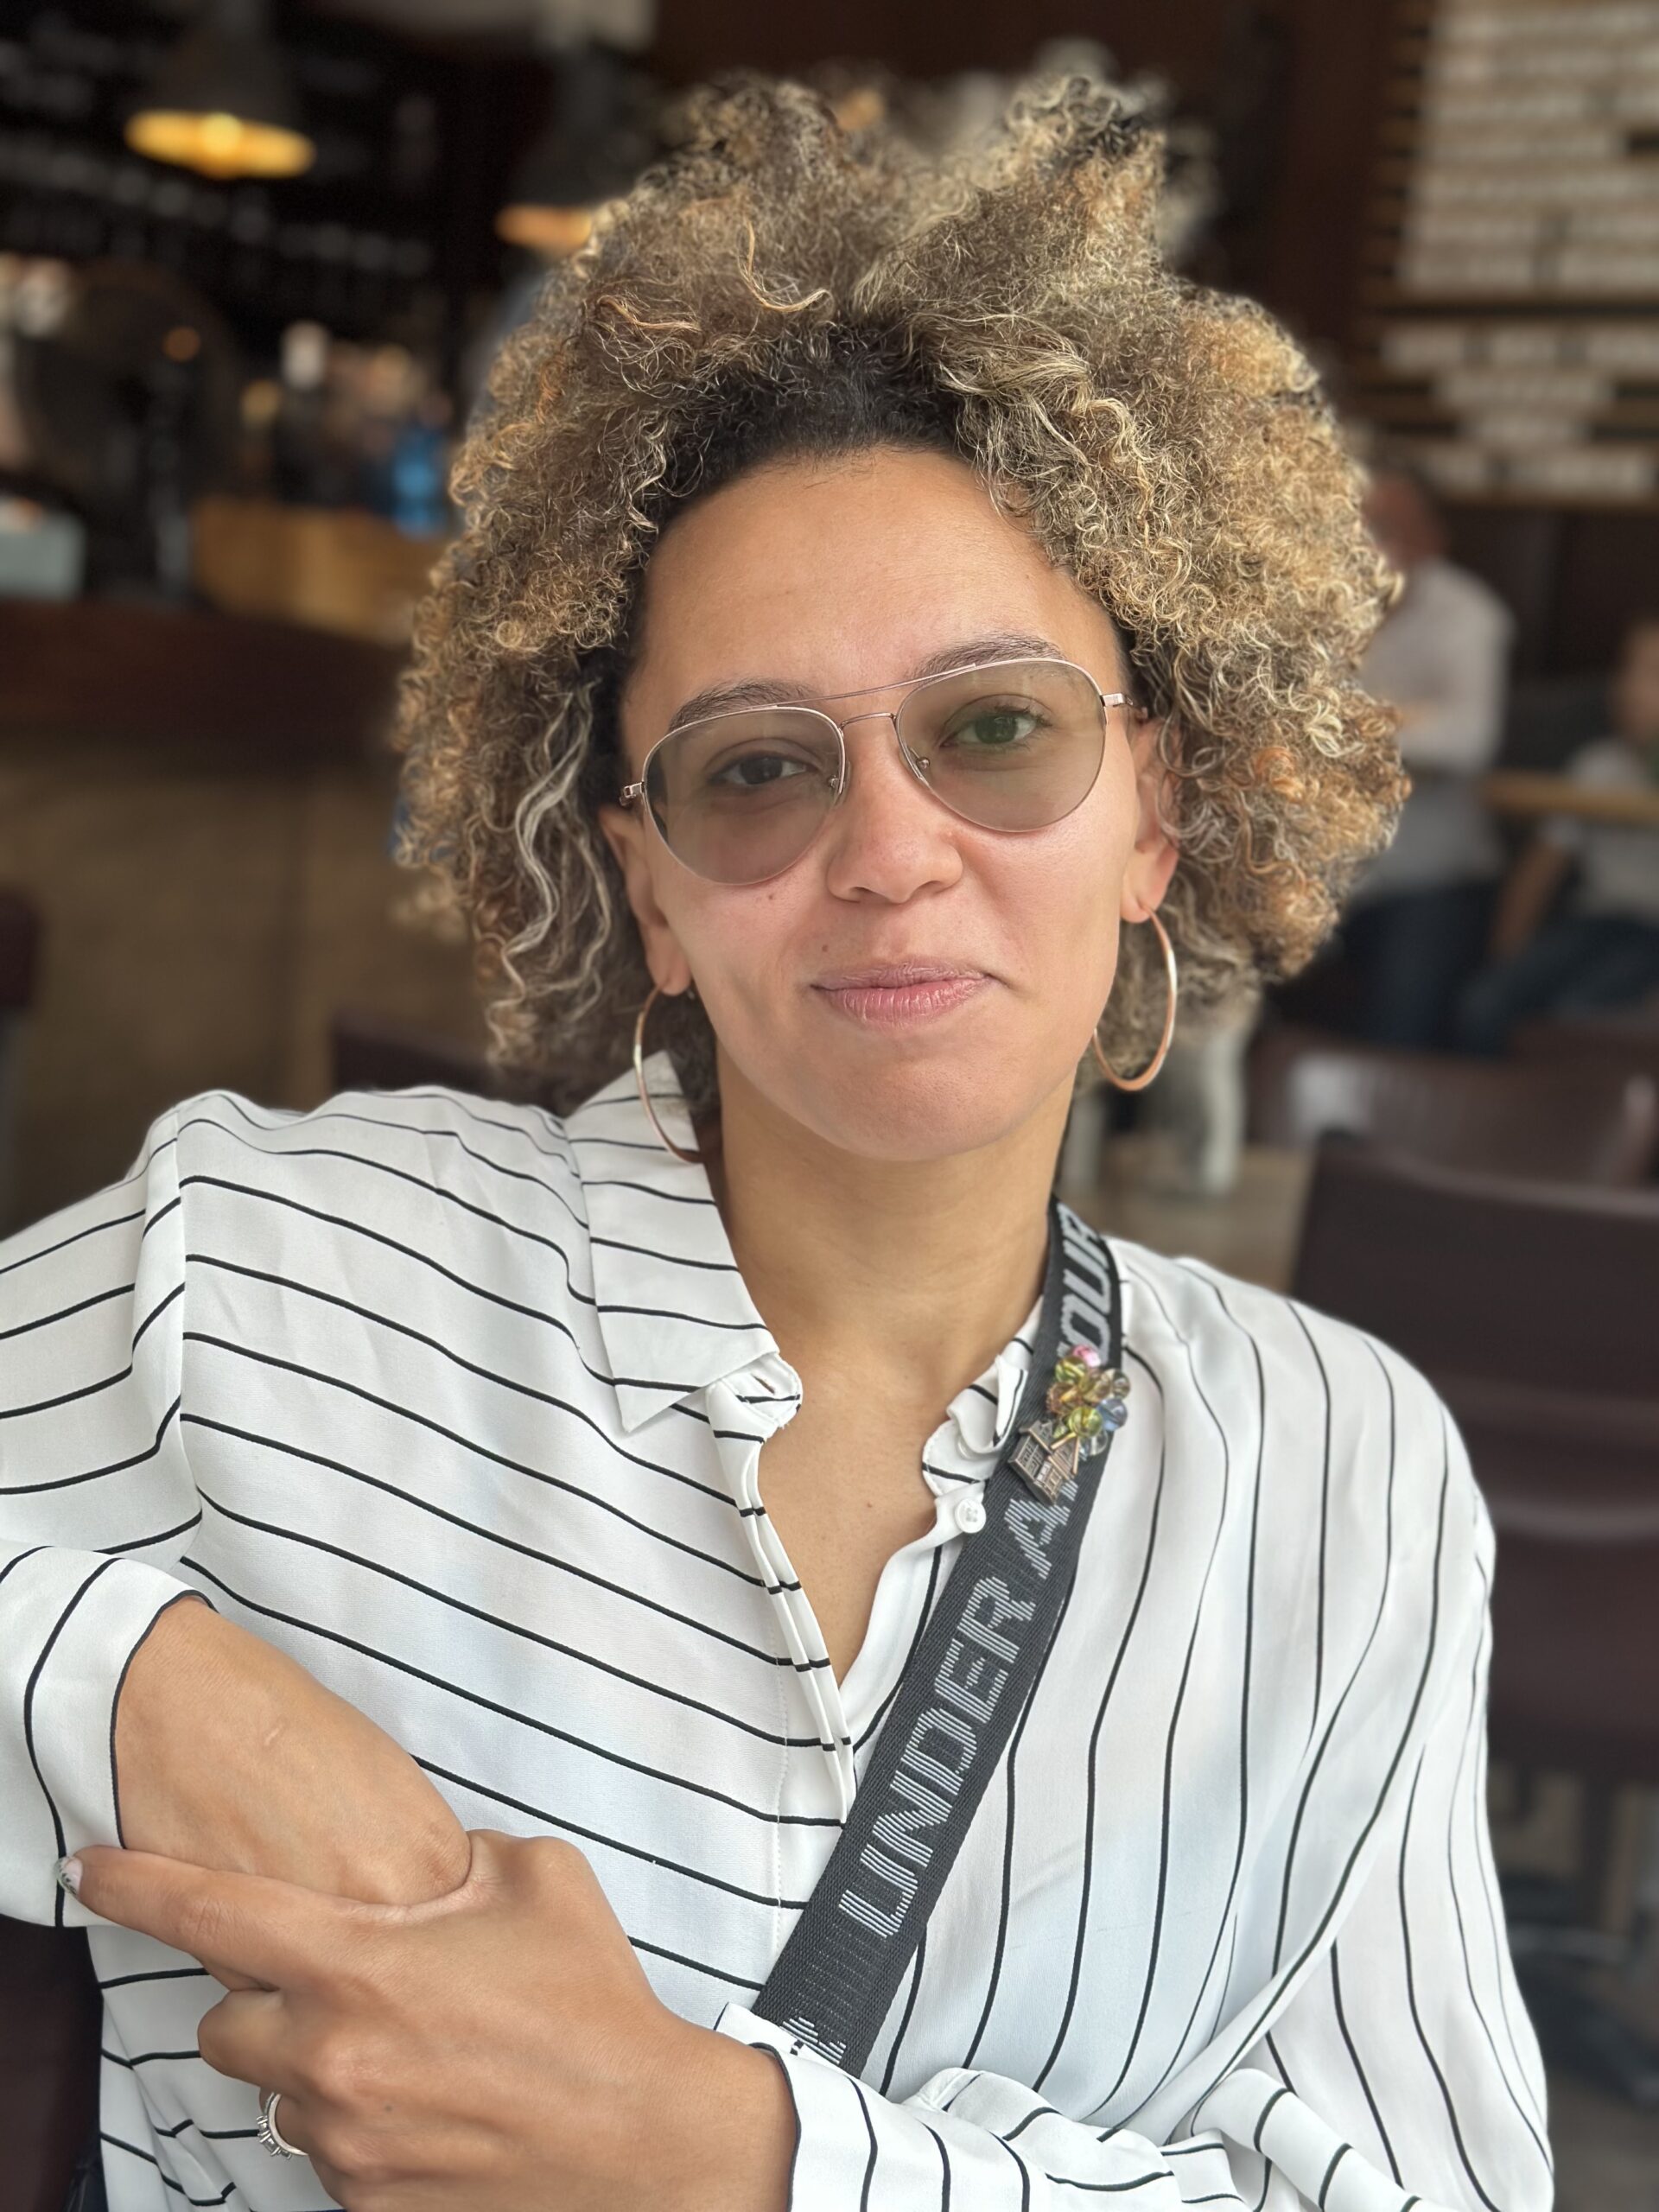 Photo of Sydney Carlson, a mixed race (Black and White) woman wearing a white button up shirt with horizontal and vertical black stripes. She has blonde curly hair and is wearing sunglasses and hoop earrings.